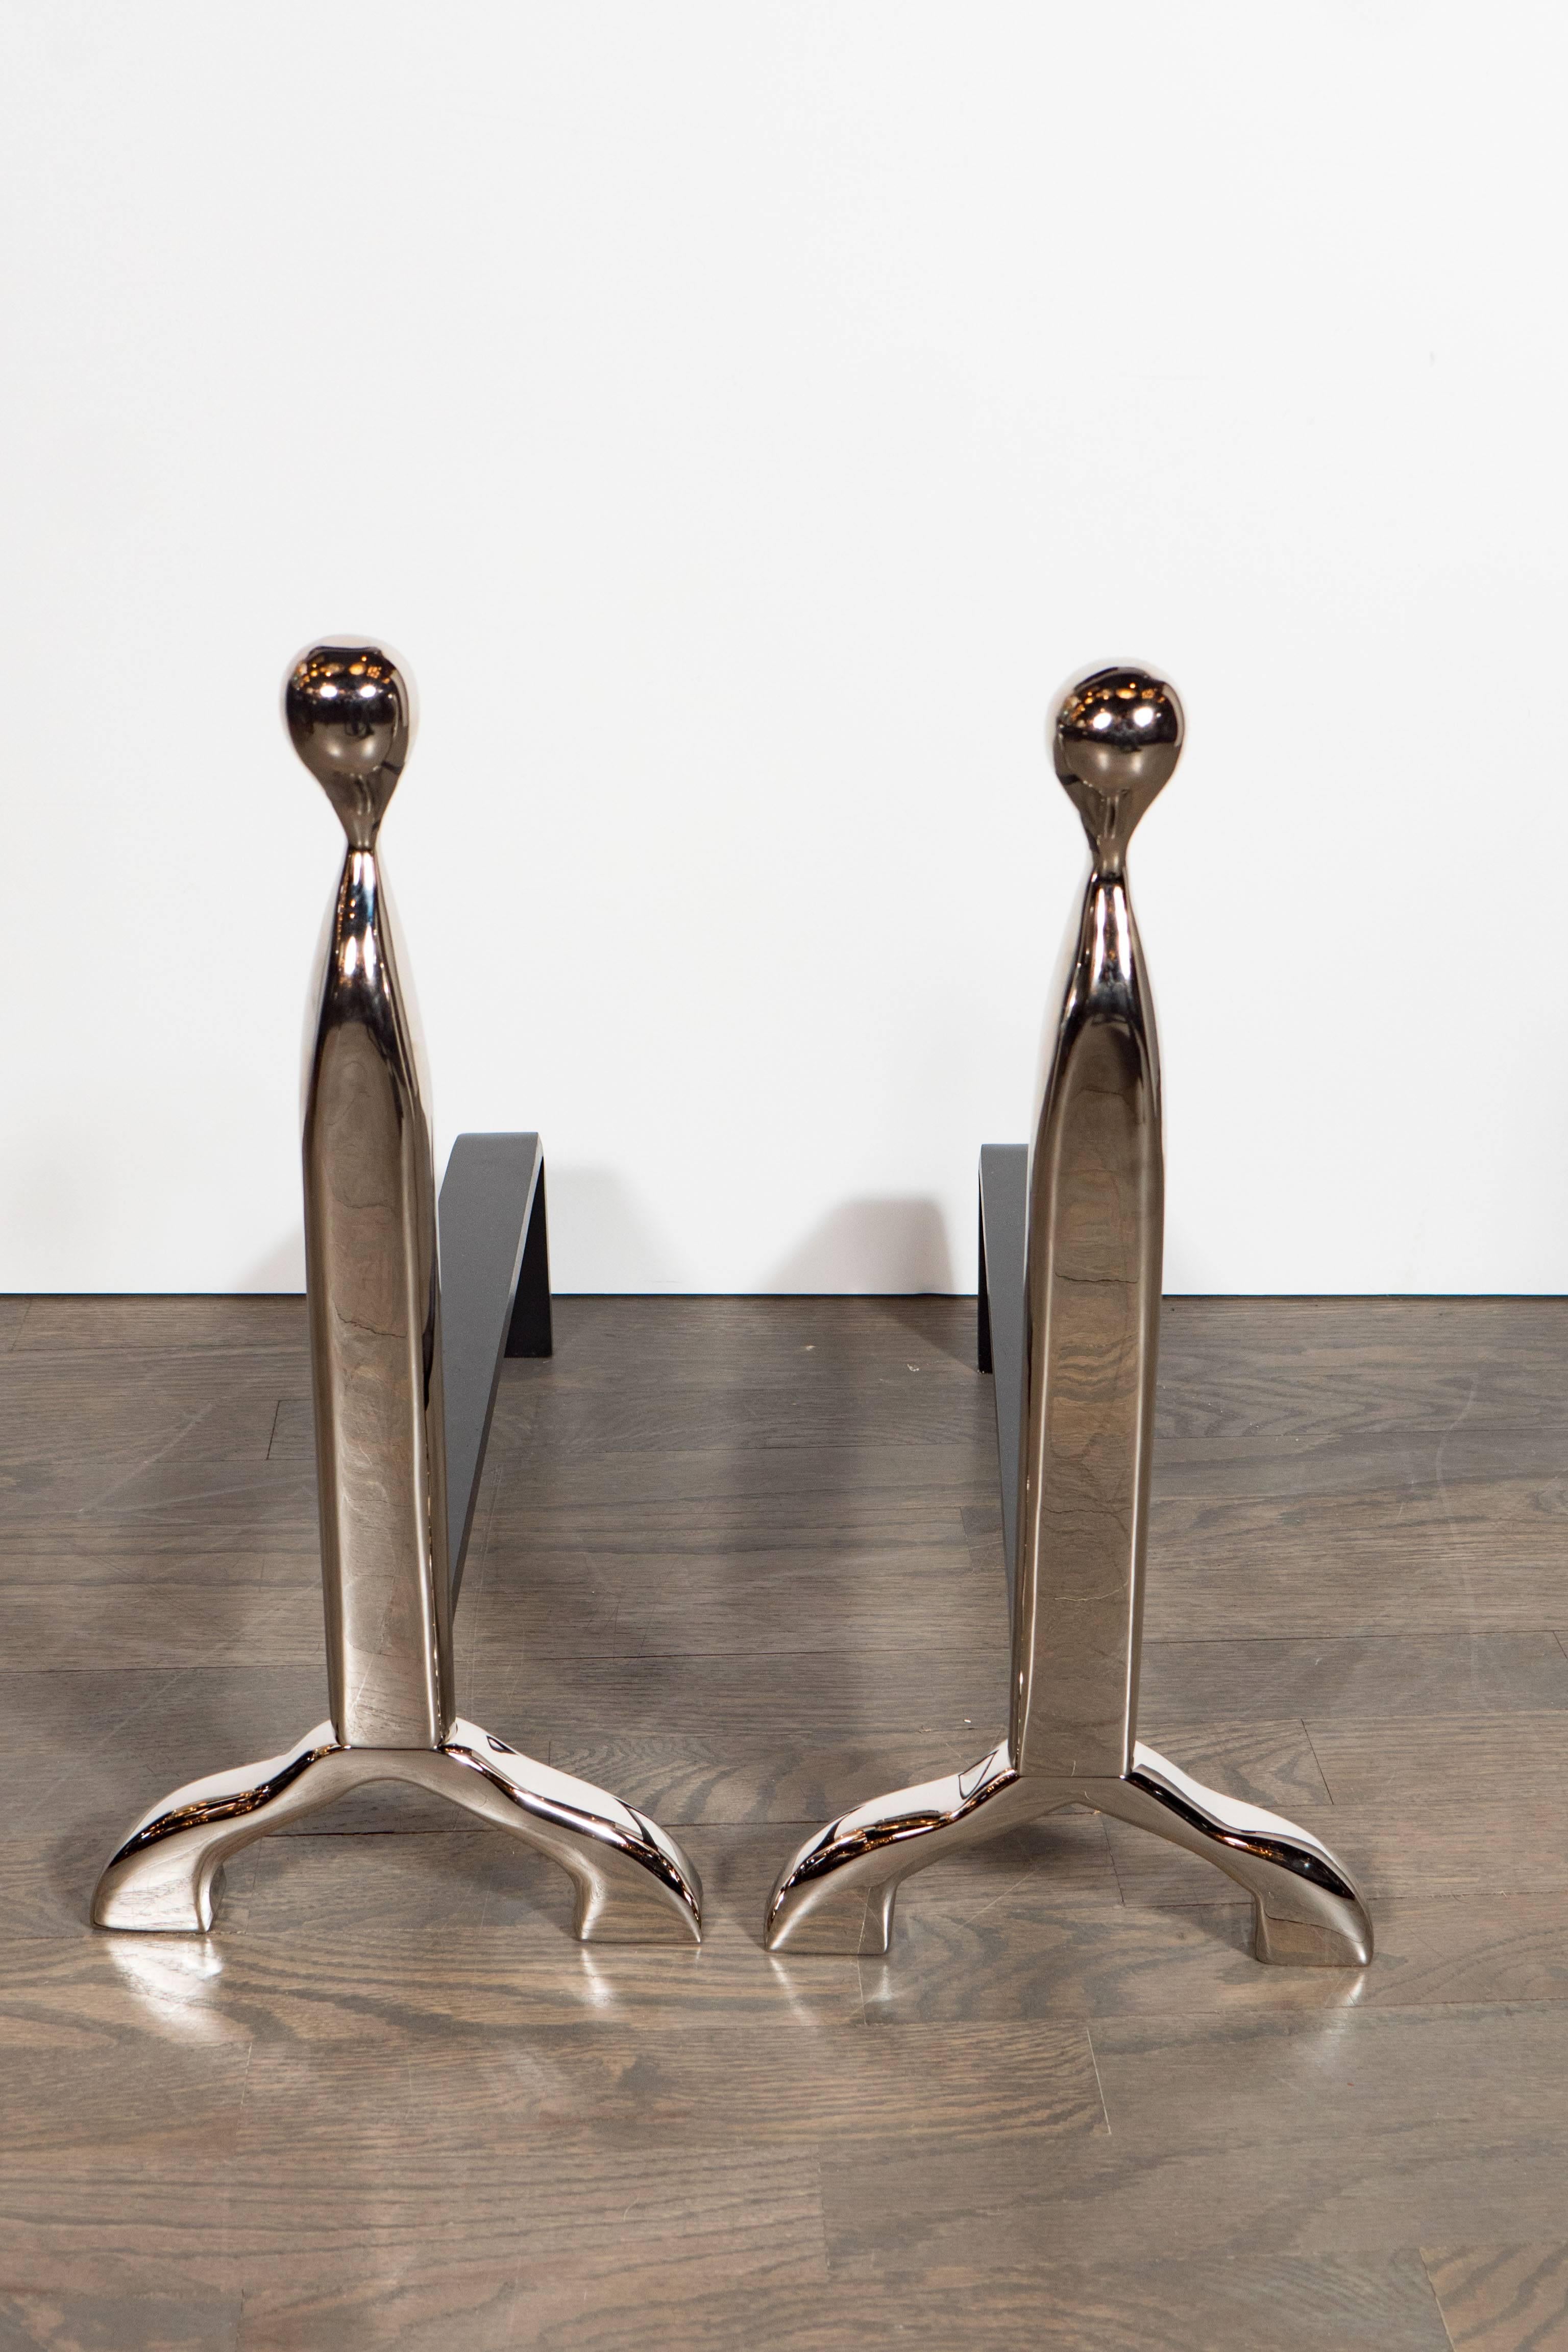 These stunning custom Mid-Century Modernist style andirons feature an elegant hair-pin design shown in polished nickel with a black enameled stem. They can be ordered in a variety of finishes. We also have an extensive custom range of fire tools,